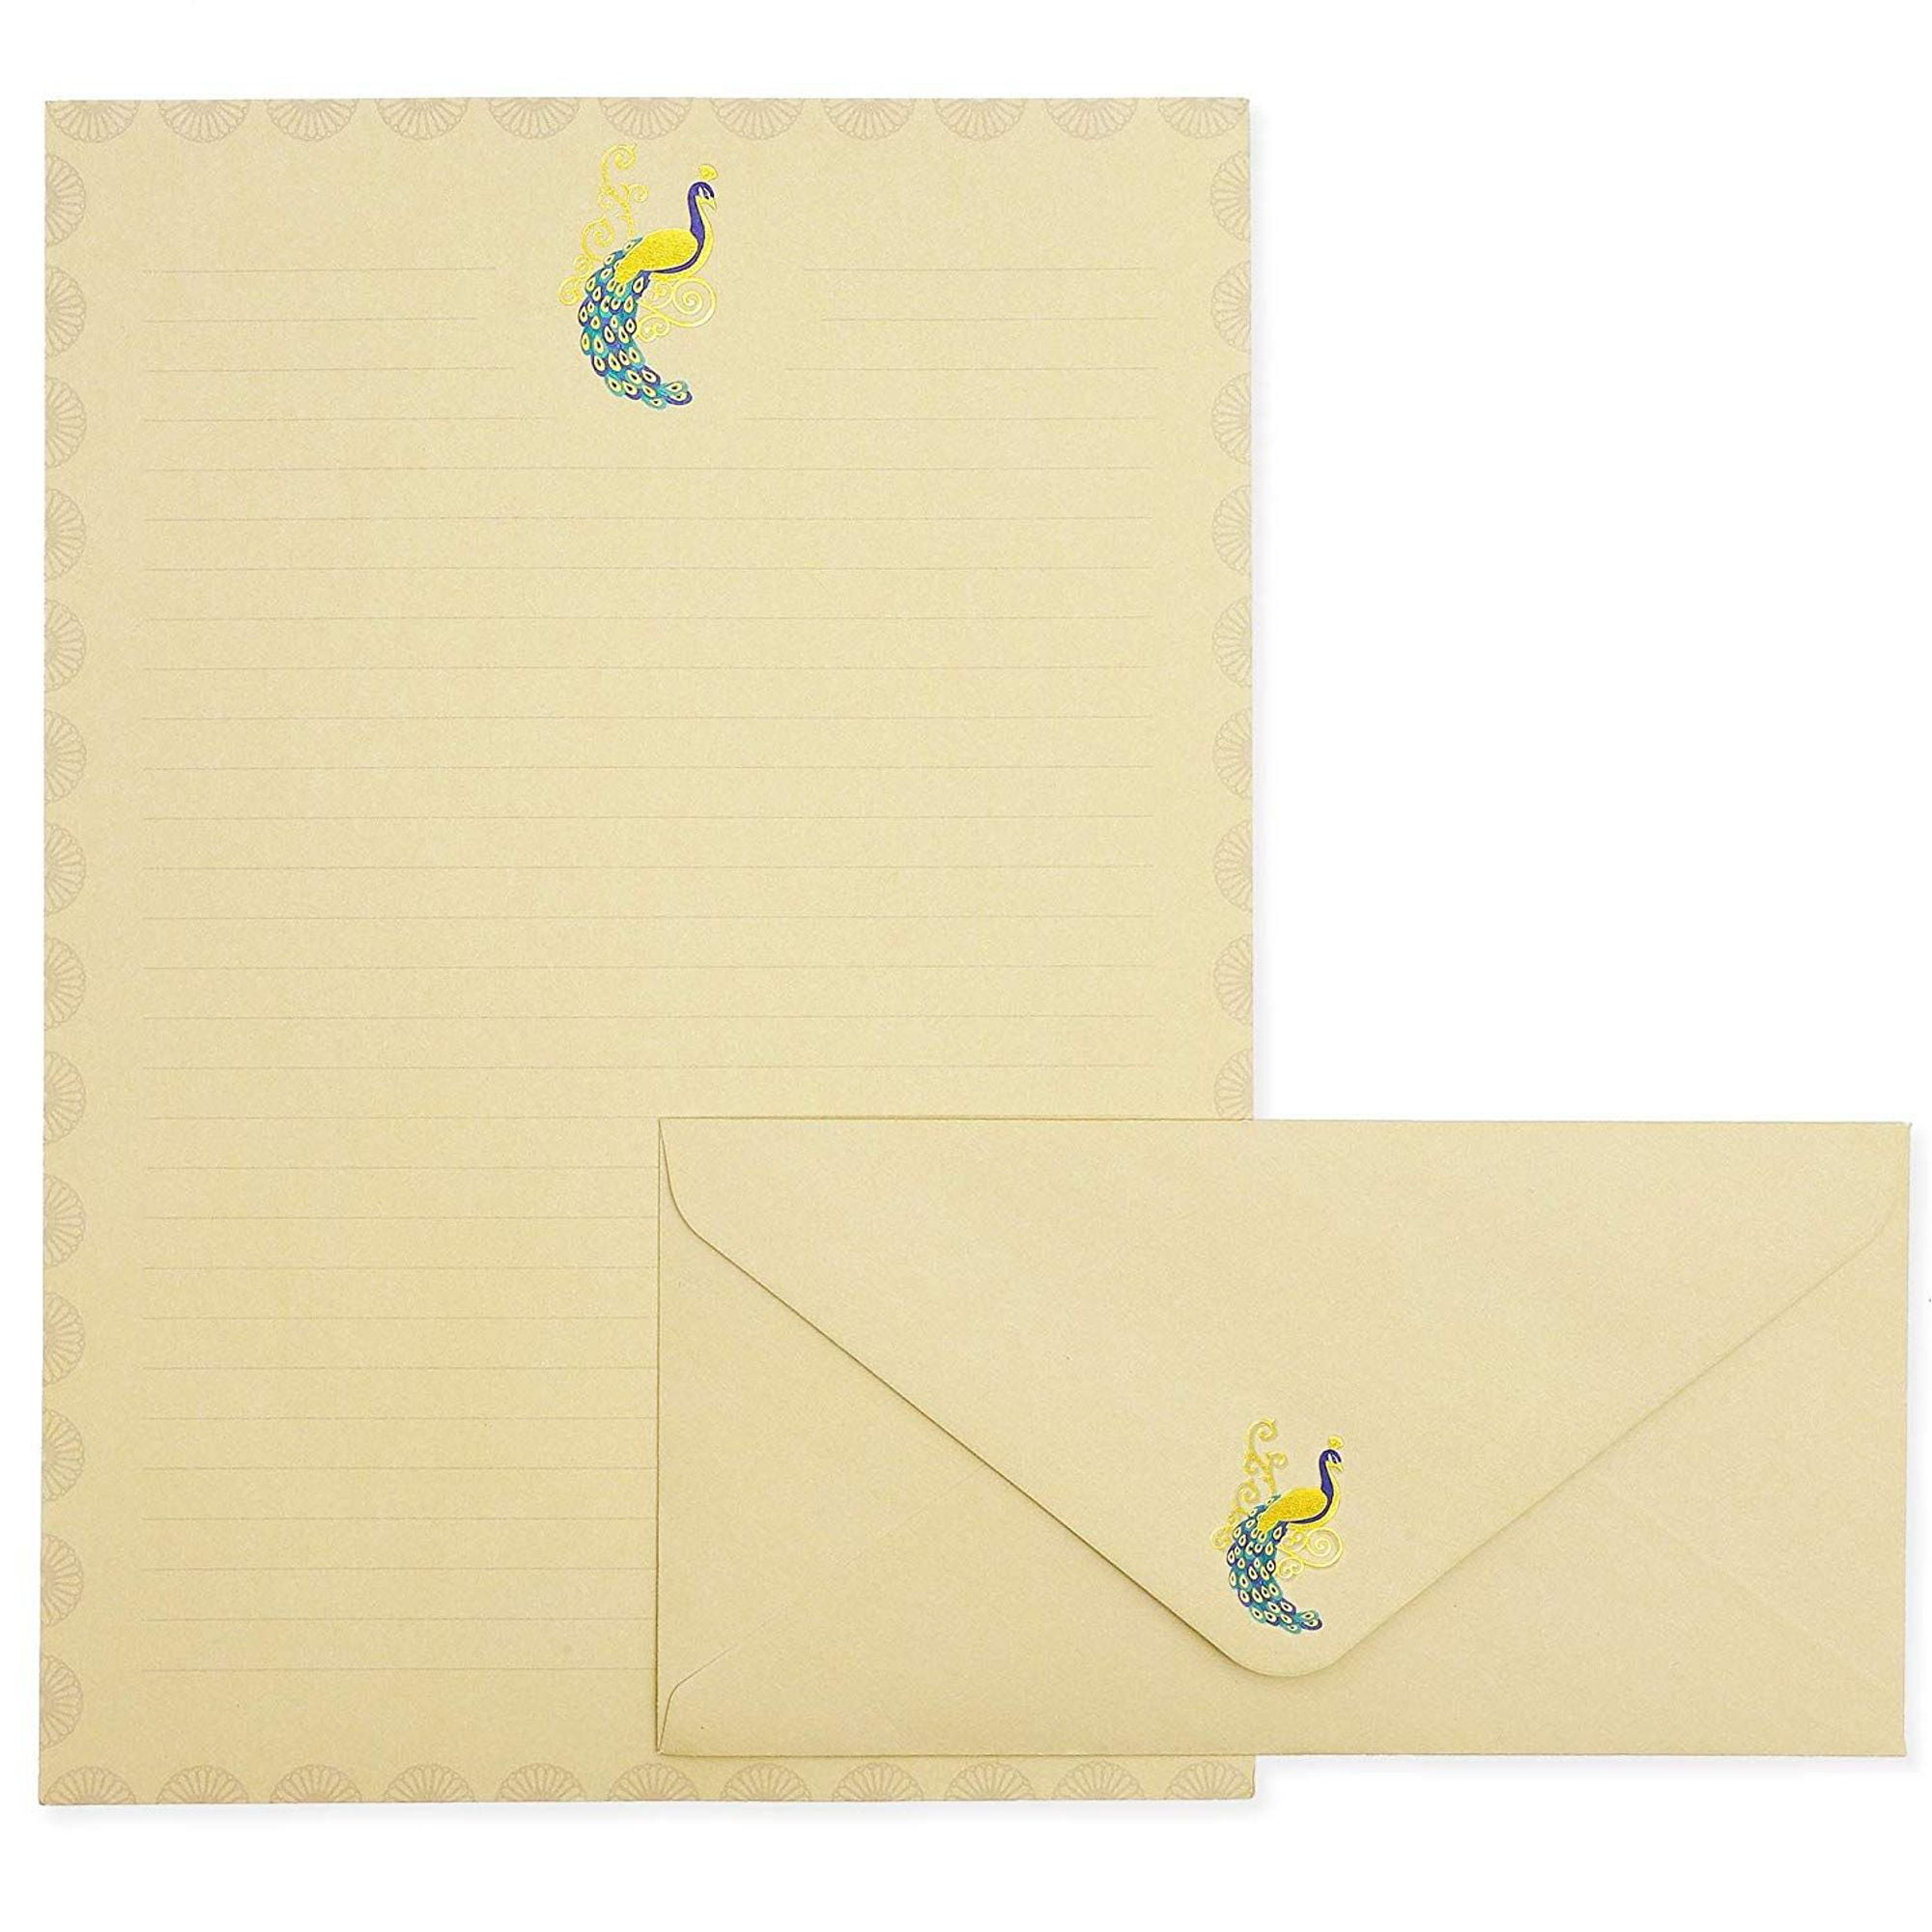 Stationery Sets for Letter Writing Including 48 Letter Paper and 24 Envelopes,Q066 Cute Lined Stationary Letter Paper and Envelopes Set